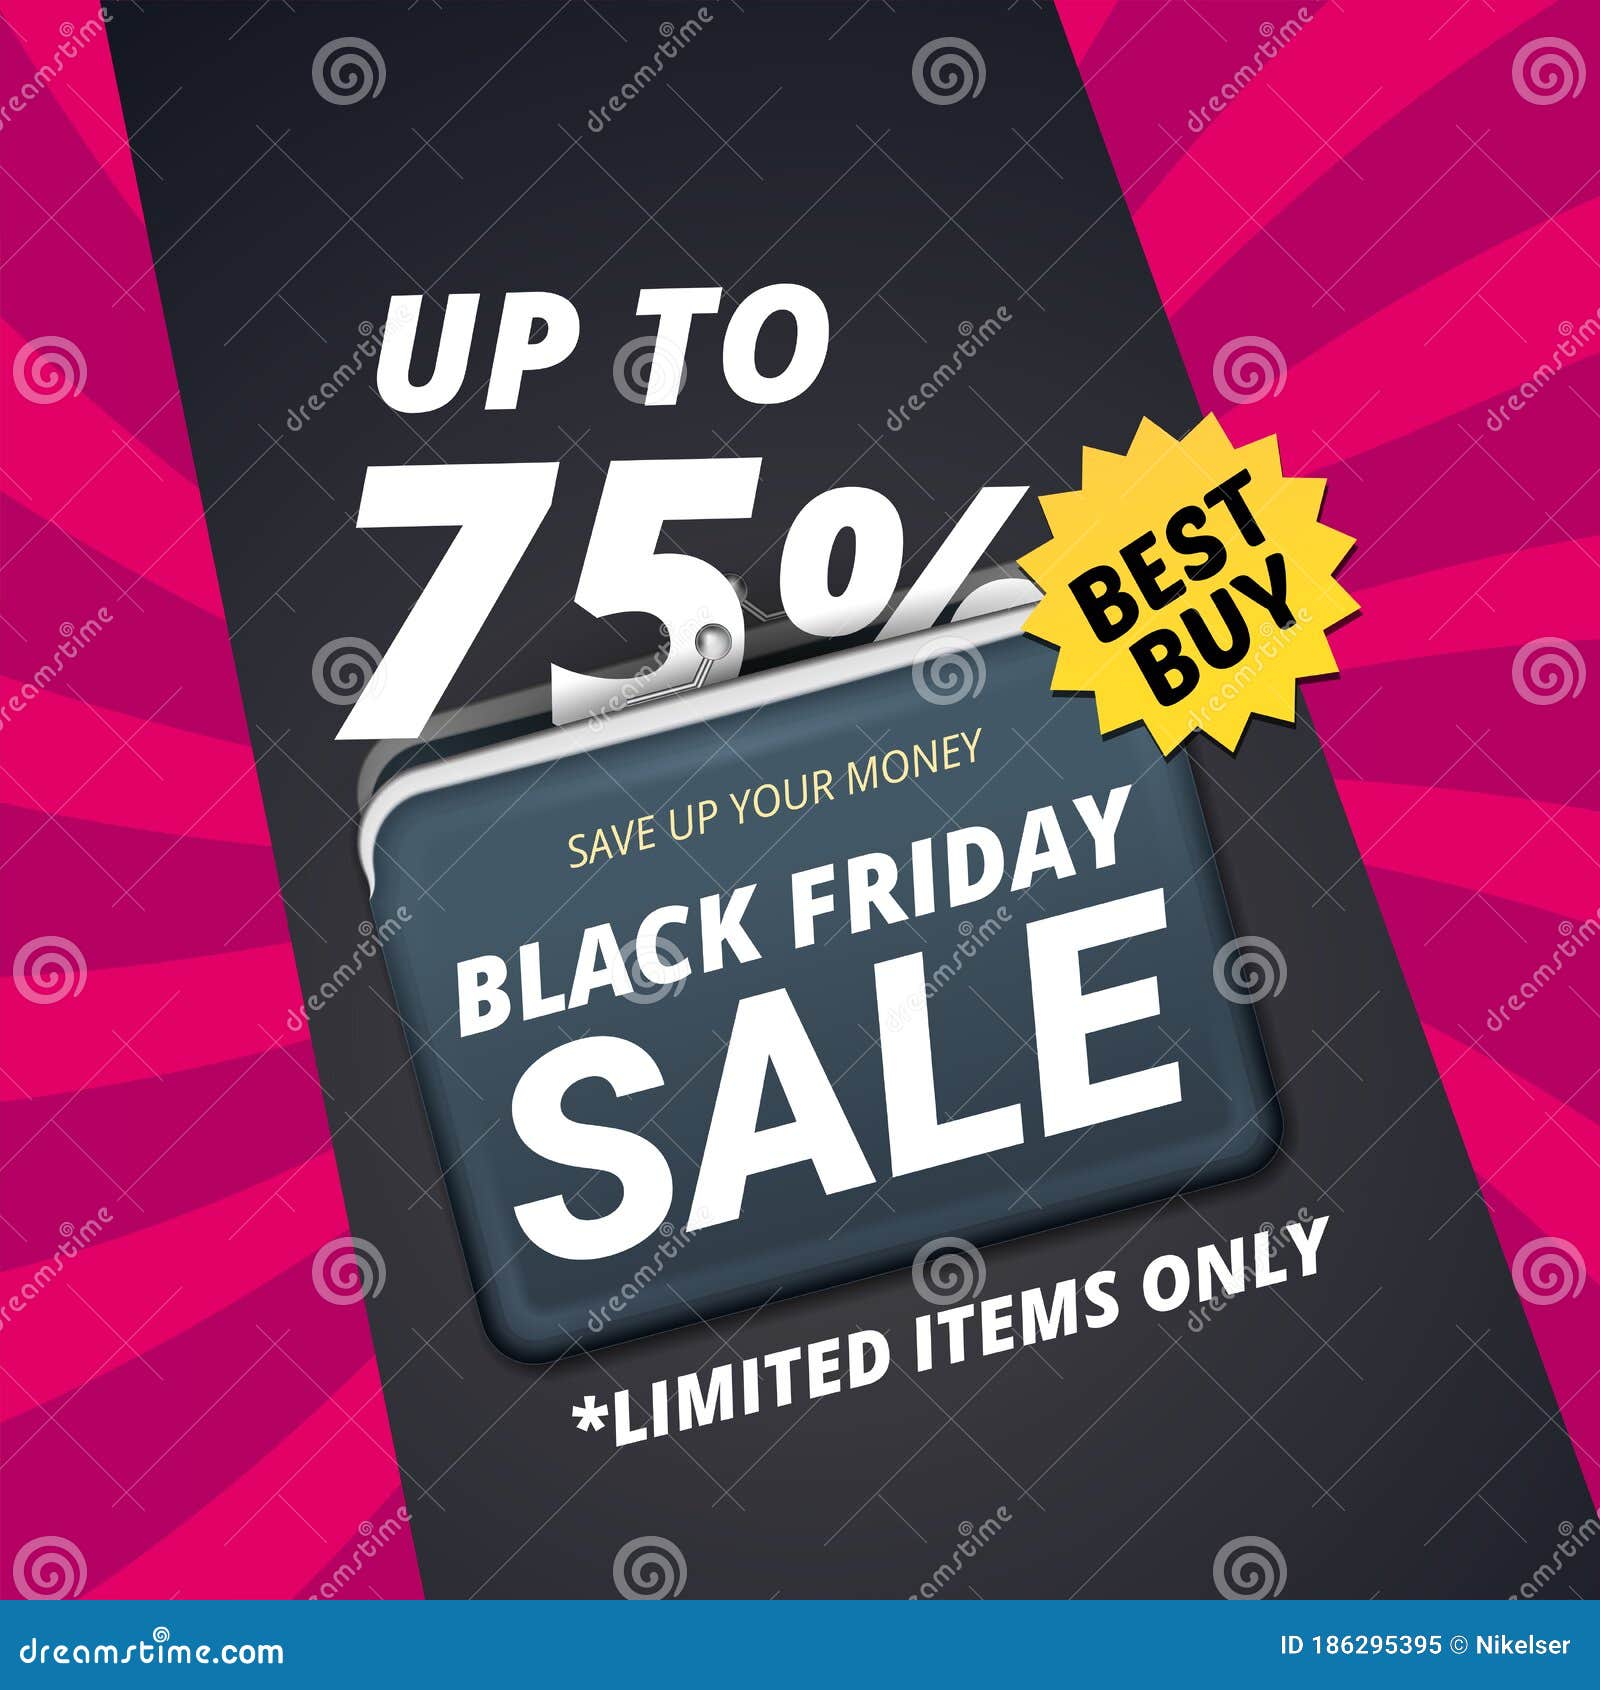 https://thumbs.dreamstime.com/z/black-friday-sale-vector-banner-template-design-wallet-money-text-save-up-your-money-big-sale-yellow-pink-186295395.jpg